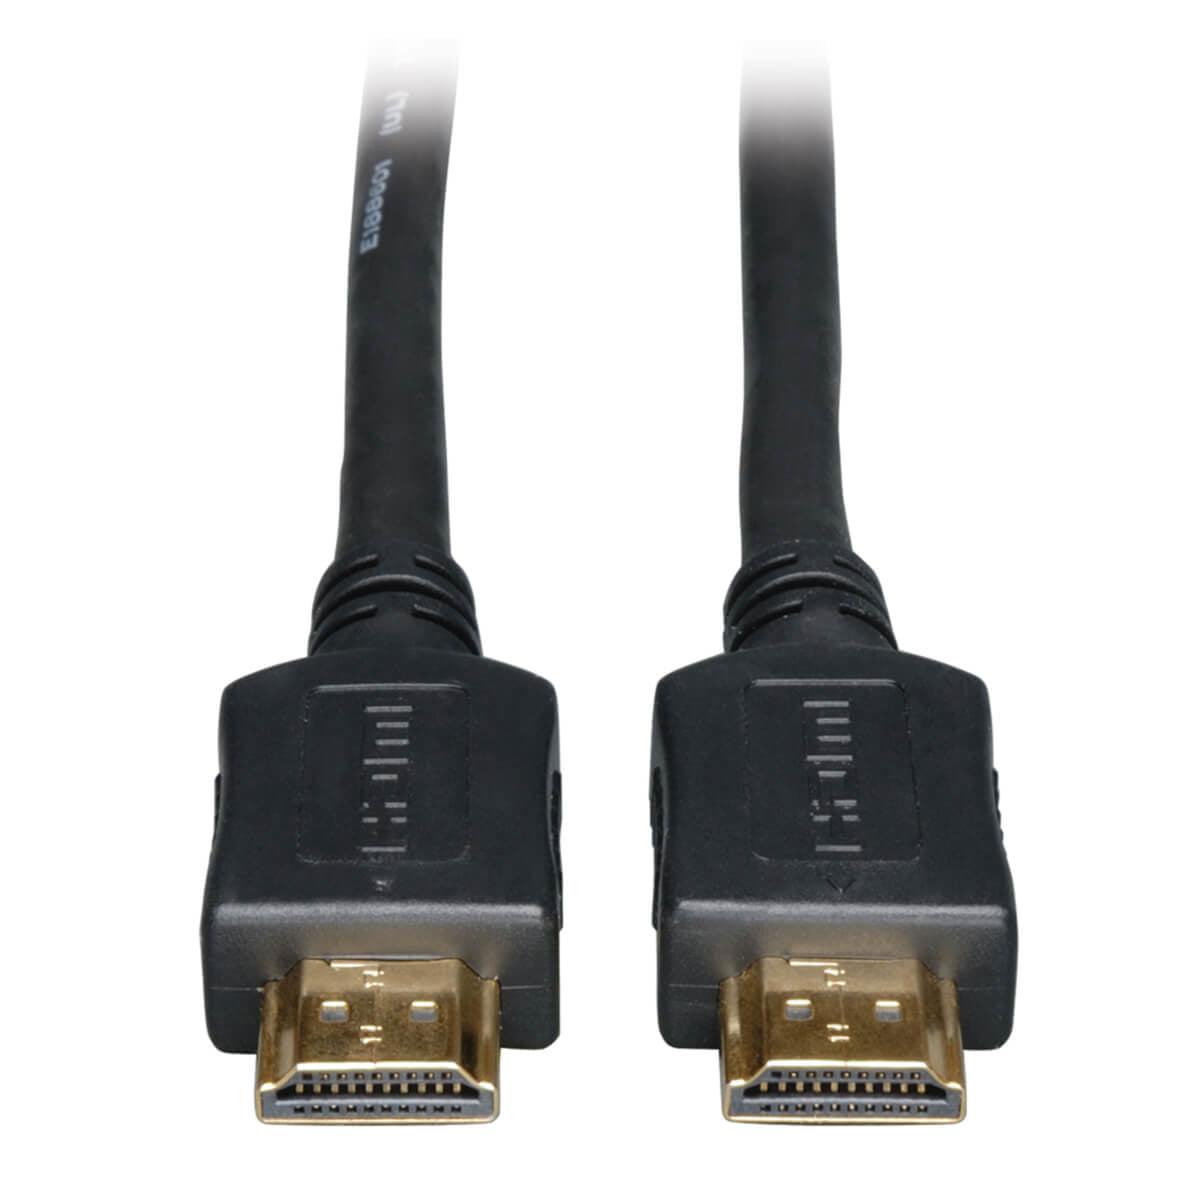 Tripp Lite P568-045-Hd-Cl2 High-Speed Hdmi Cable With Ethernet (M/M) - 4K, No Signal Booster Needed, Cl2 Rated, Black, 45 Ft.